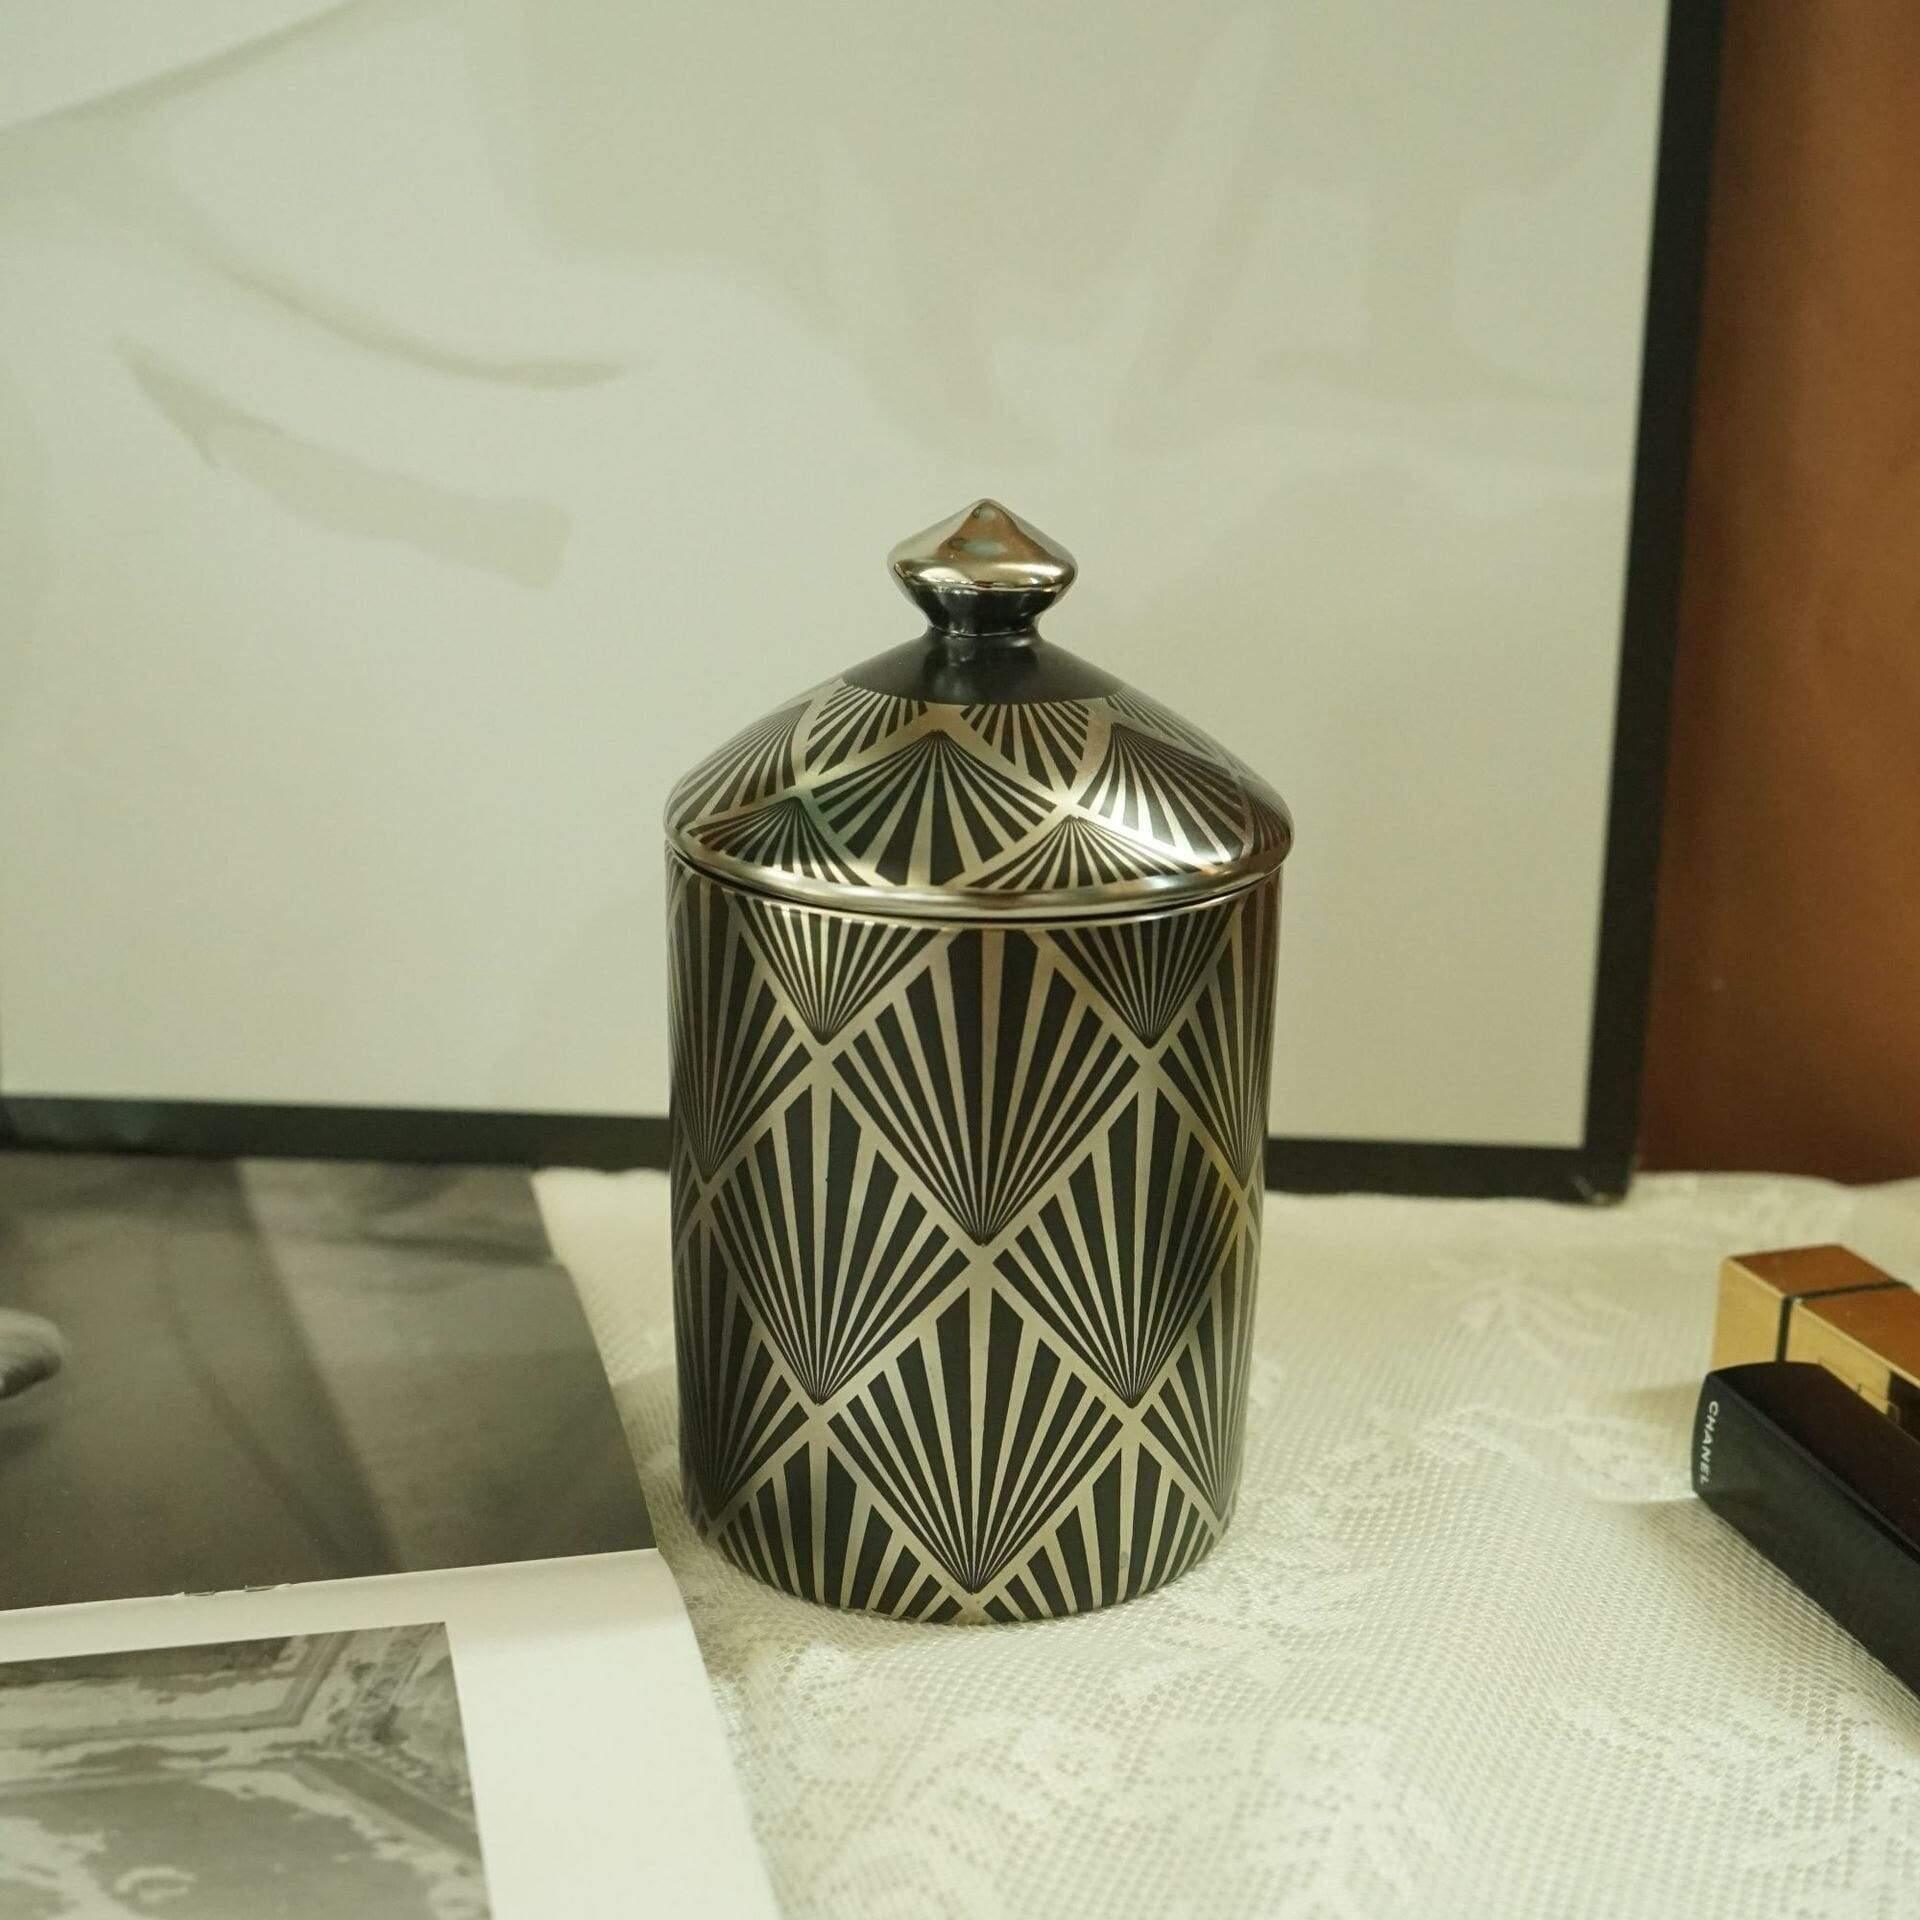 Shop 0 A balck silver Geometric Gold Silver Black Ceramic Storage Cup Design Home Wedding Decoration Accessories Easter Friends Tv Egypt Candle Jars Mademoiselle Home Decor